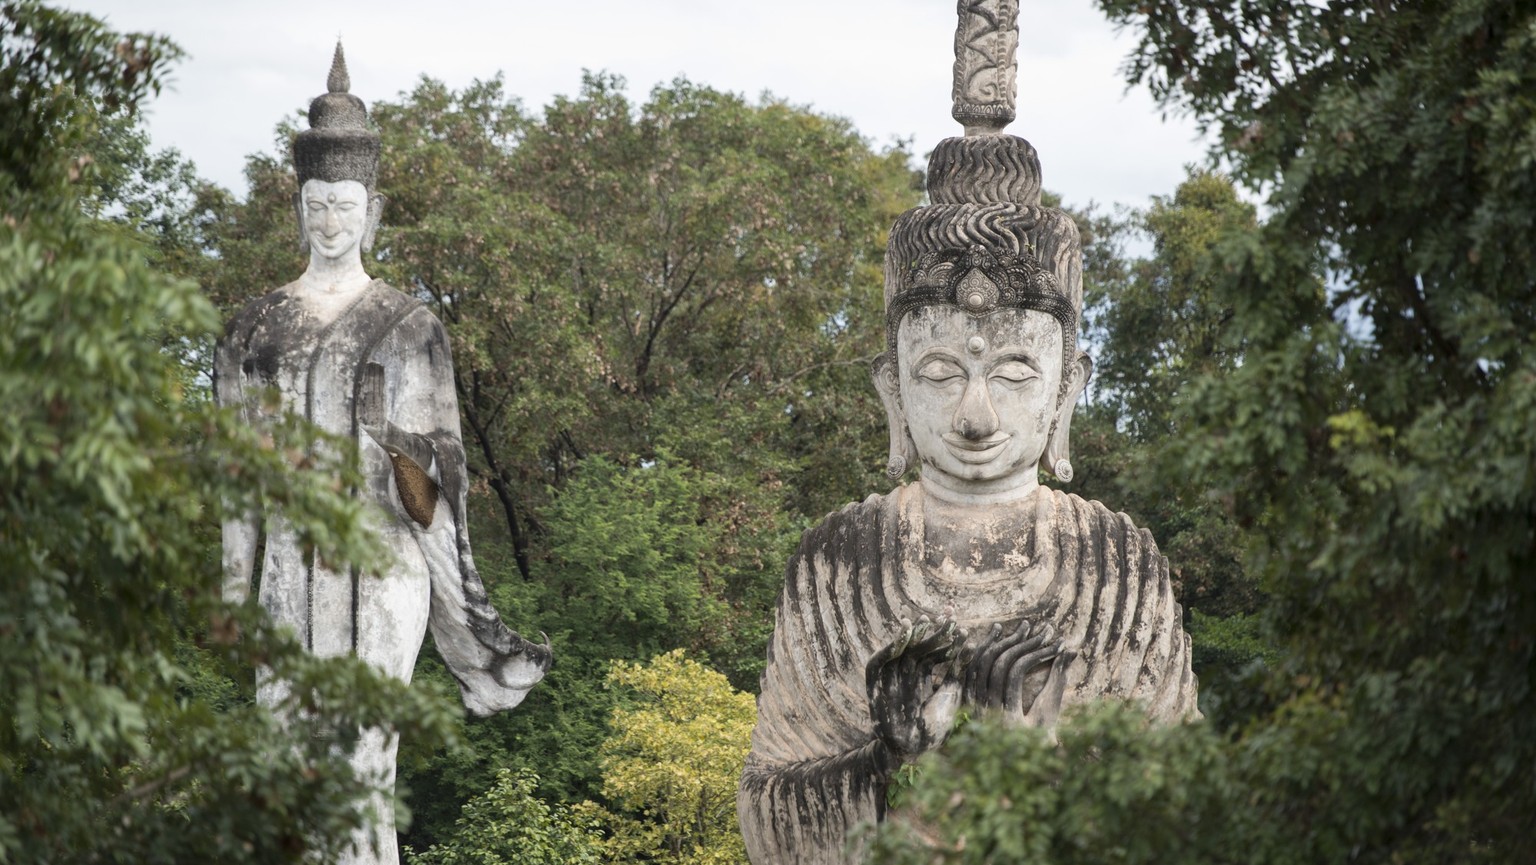 the Sala Kaew Ku Sculpture Park near the town of Nong Khai in Isan in north east Thailand on the Border to Laos xkwx asia, southeastasia, thailand, north east thailand, northeast thailand, isan, mekon ...